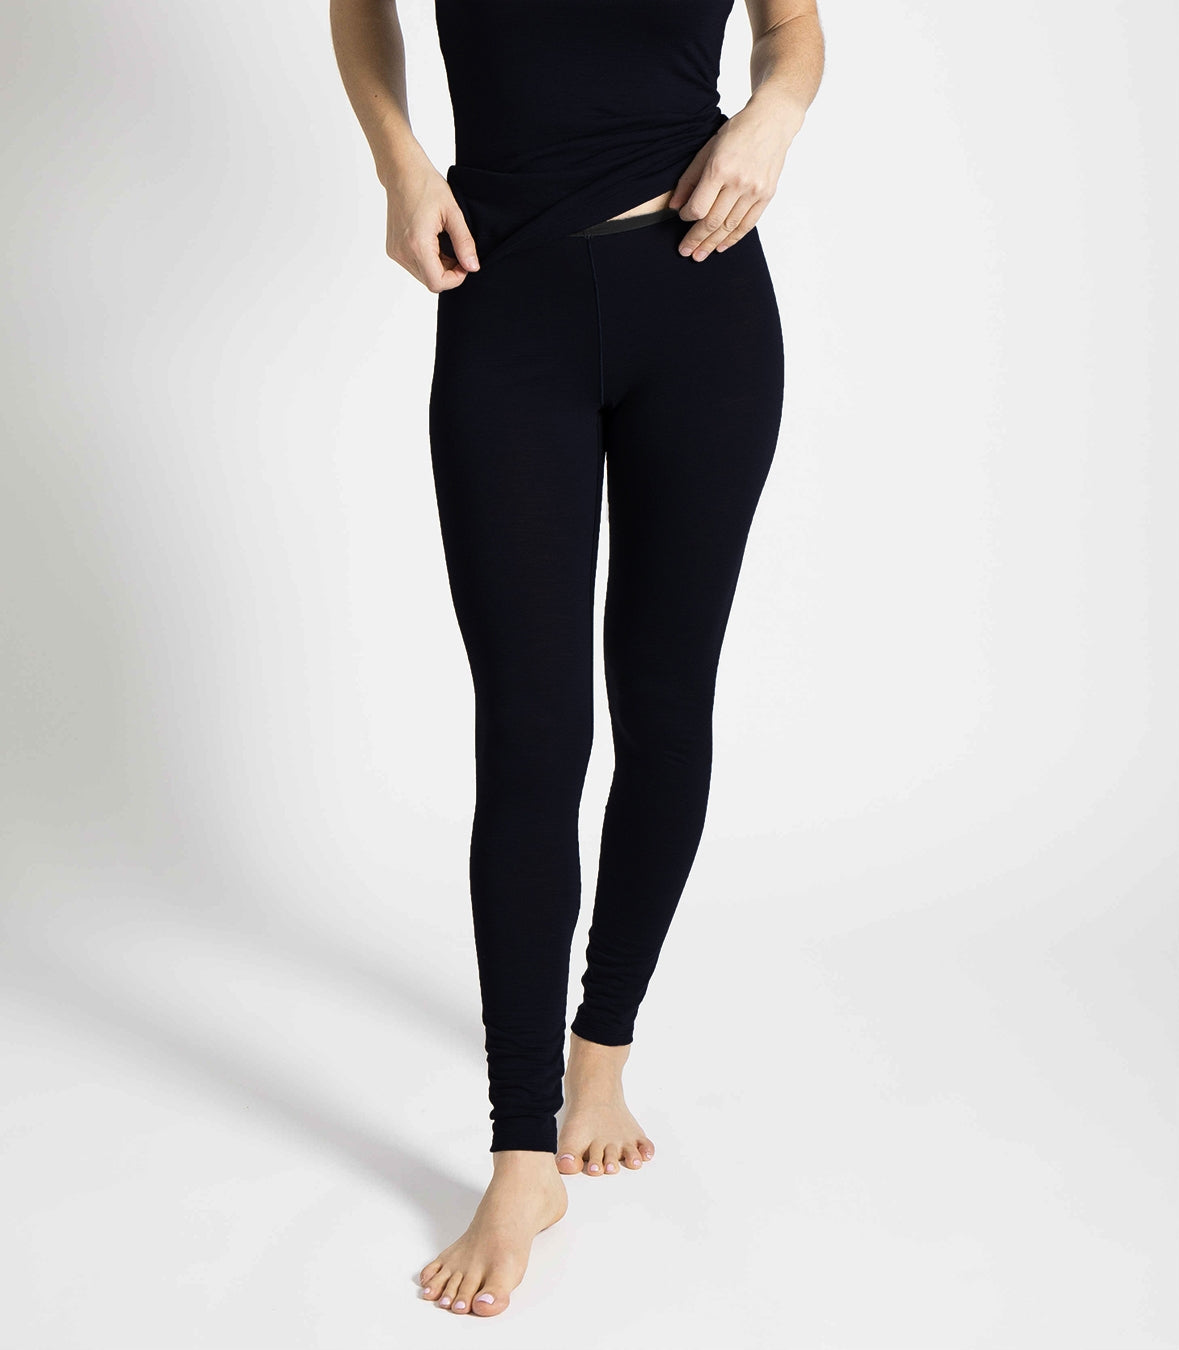 The Best Sustainable Tights - Shopping